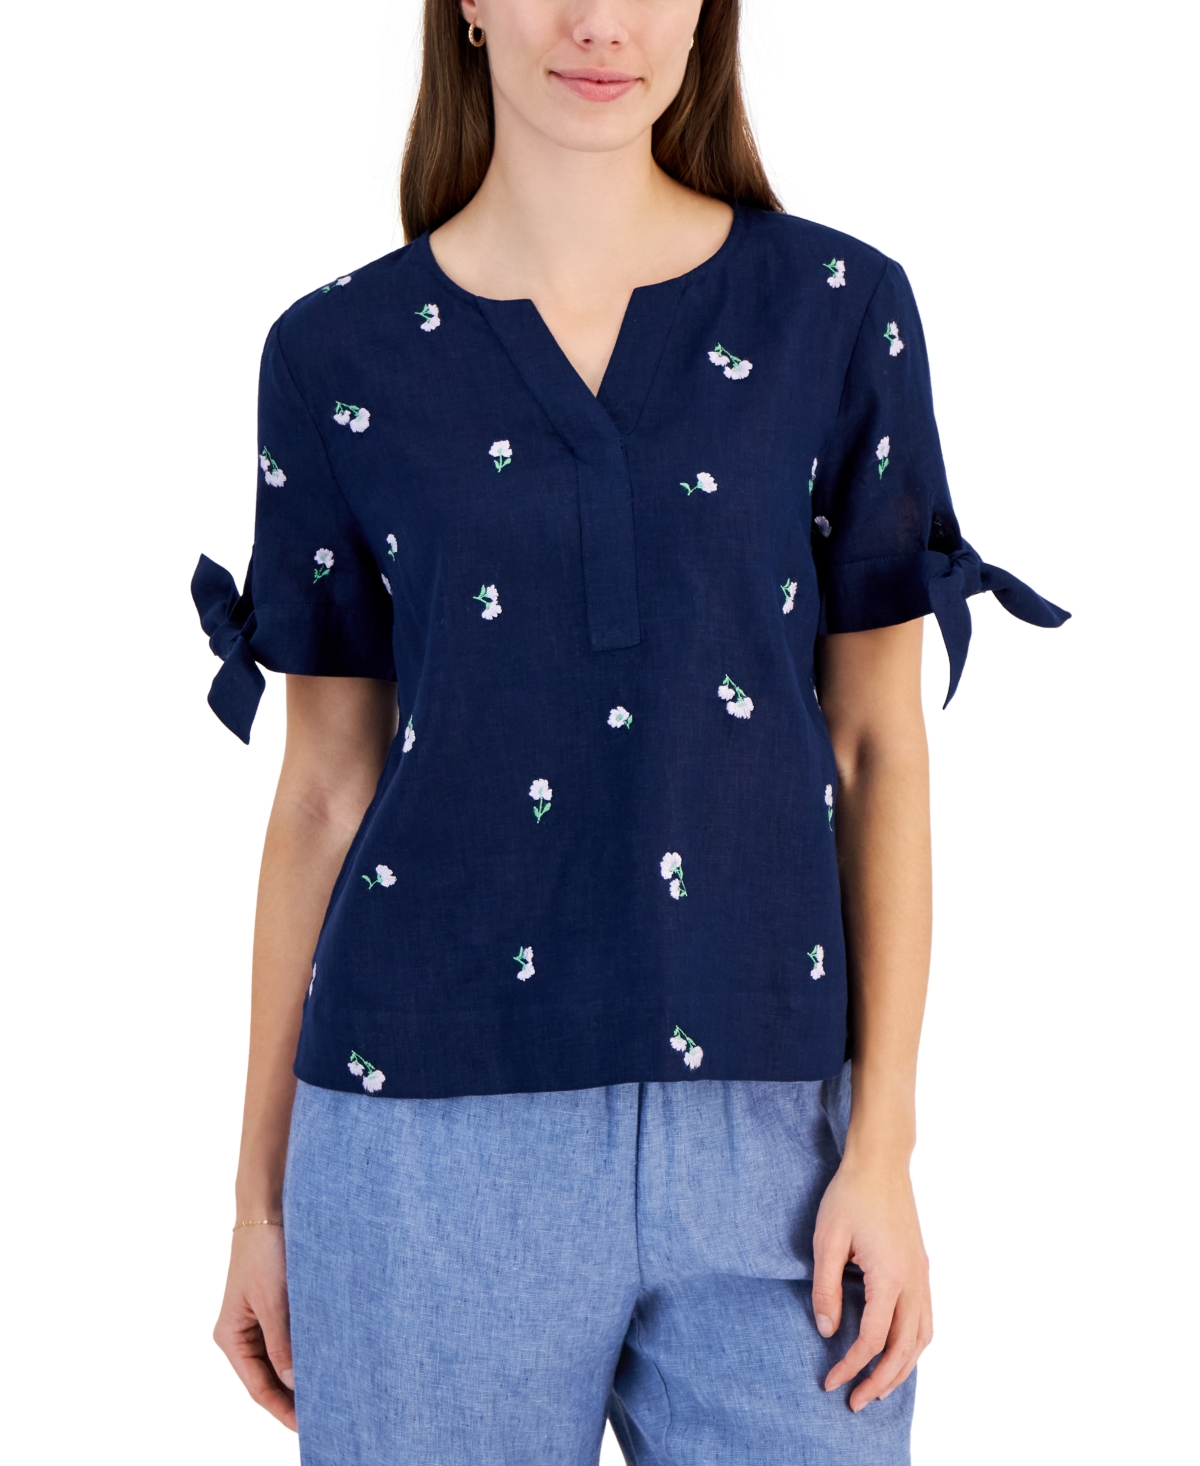 Women's London 100% Linen Floral-Embroidered Top, Created for Macy's - Intrepid Blue Combo